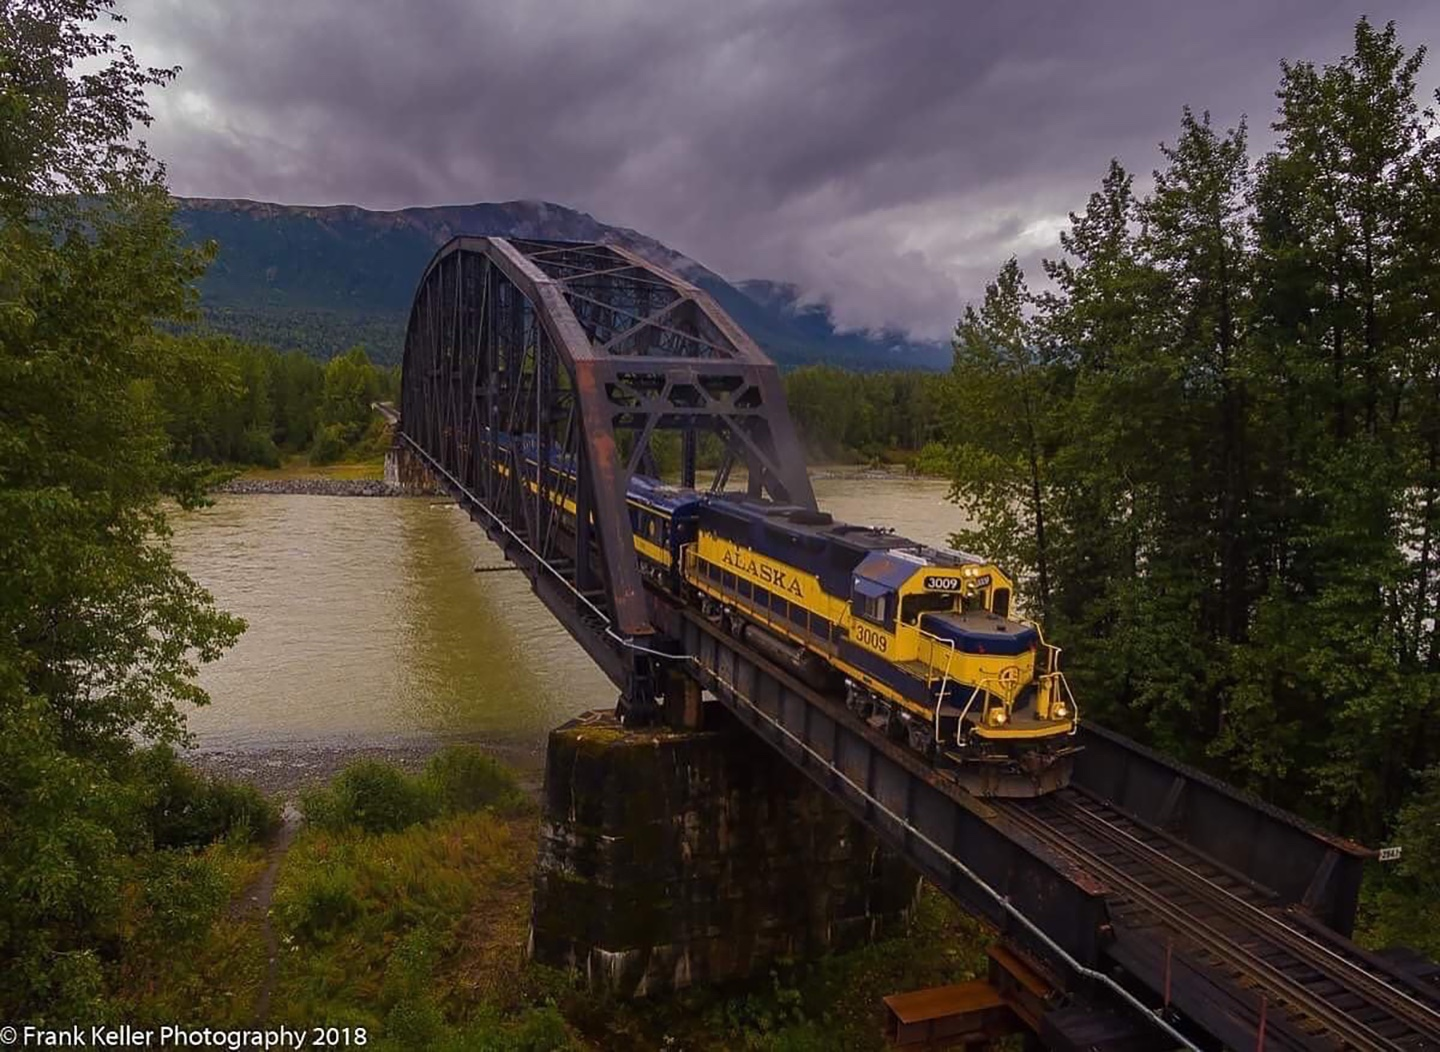 Crossing the Susitna River at Gold Creek as this train works their way north to Hurricane.